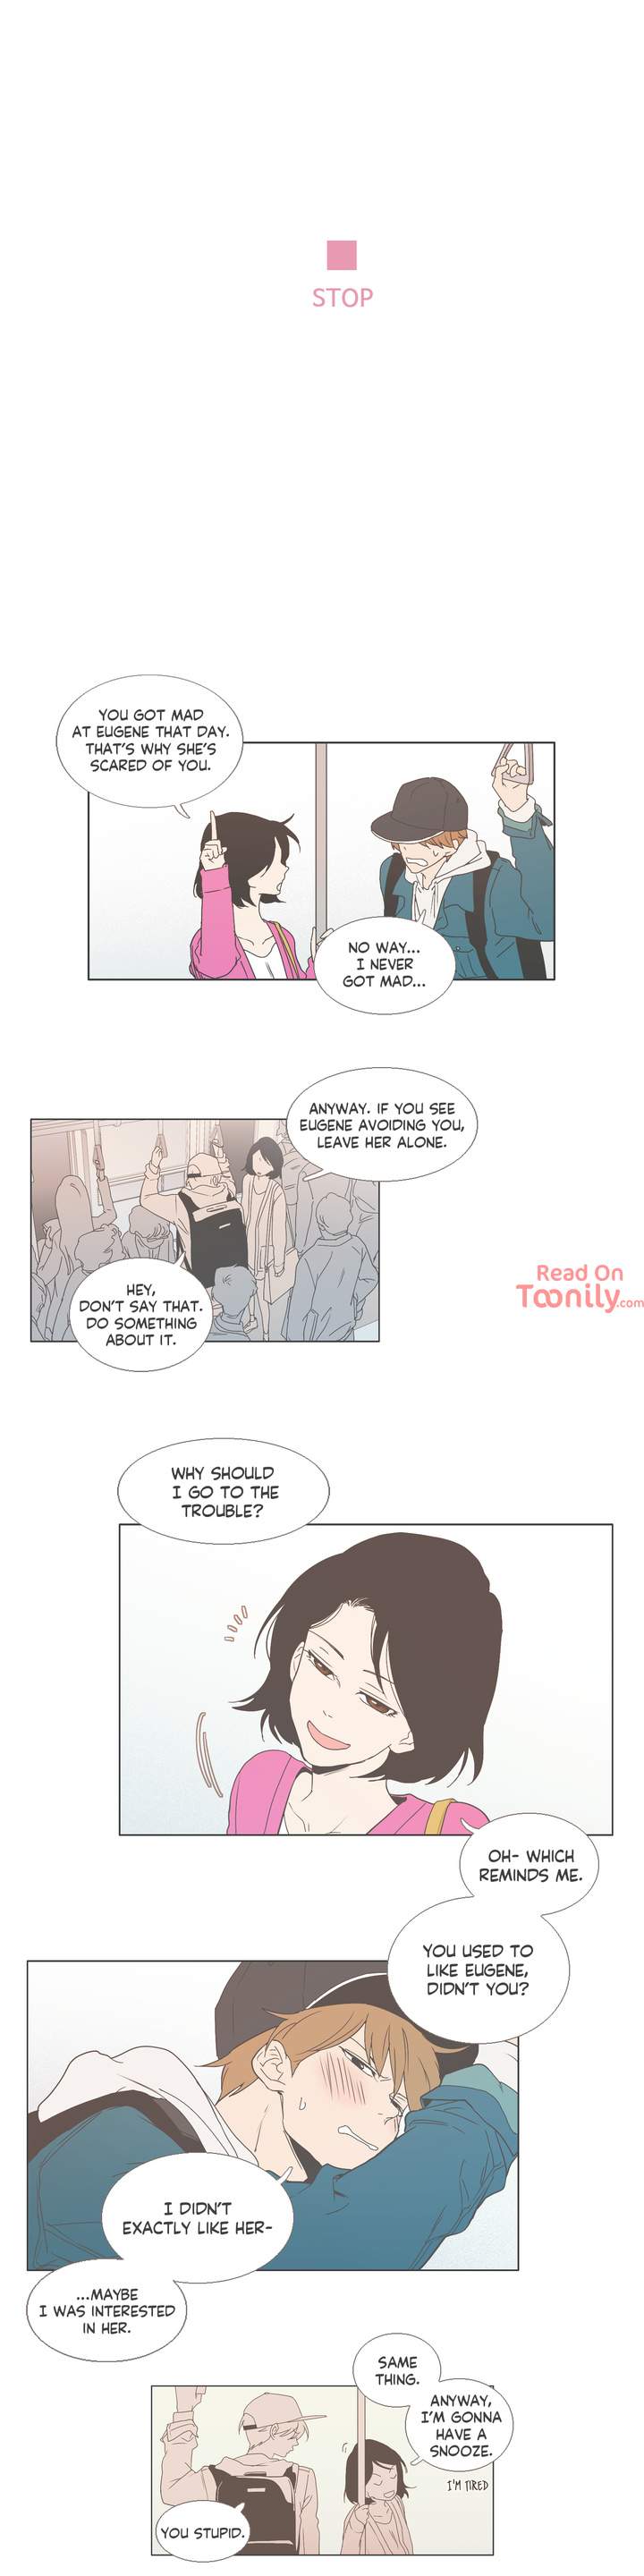 Something About Us - Chapter 6 Page 10